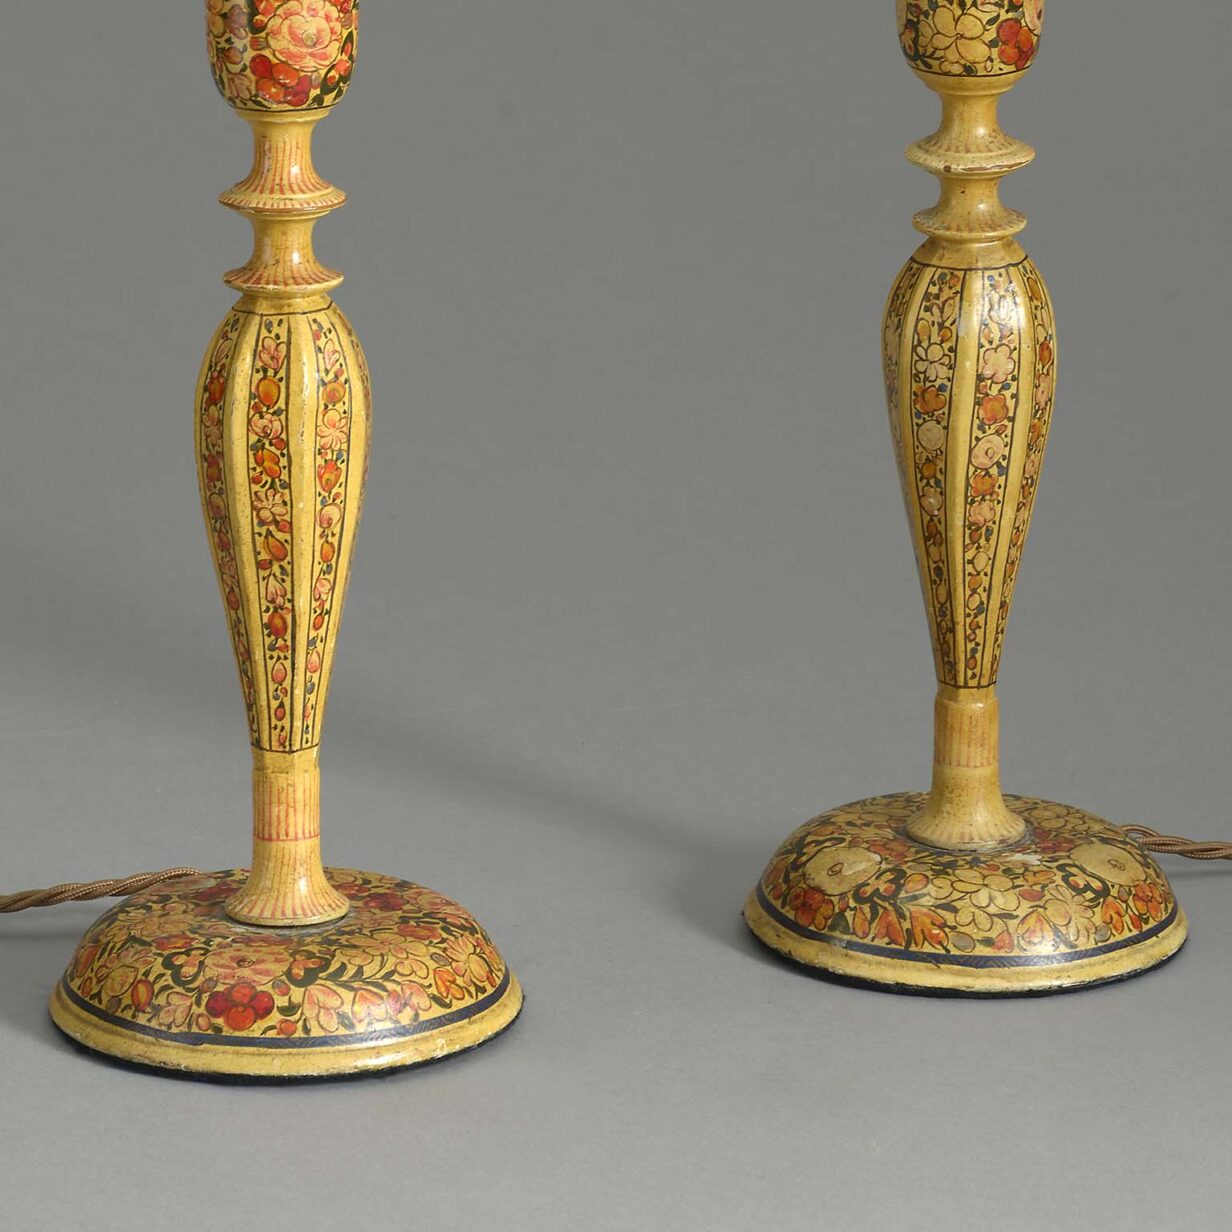 Pair of 19th century kashmiri lacquer candlestick lamps